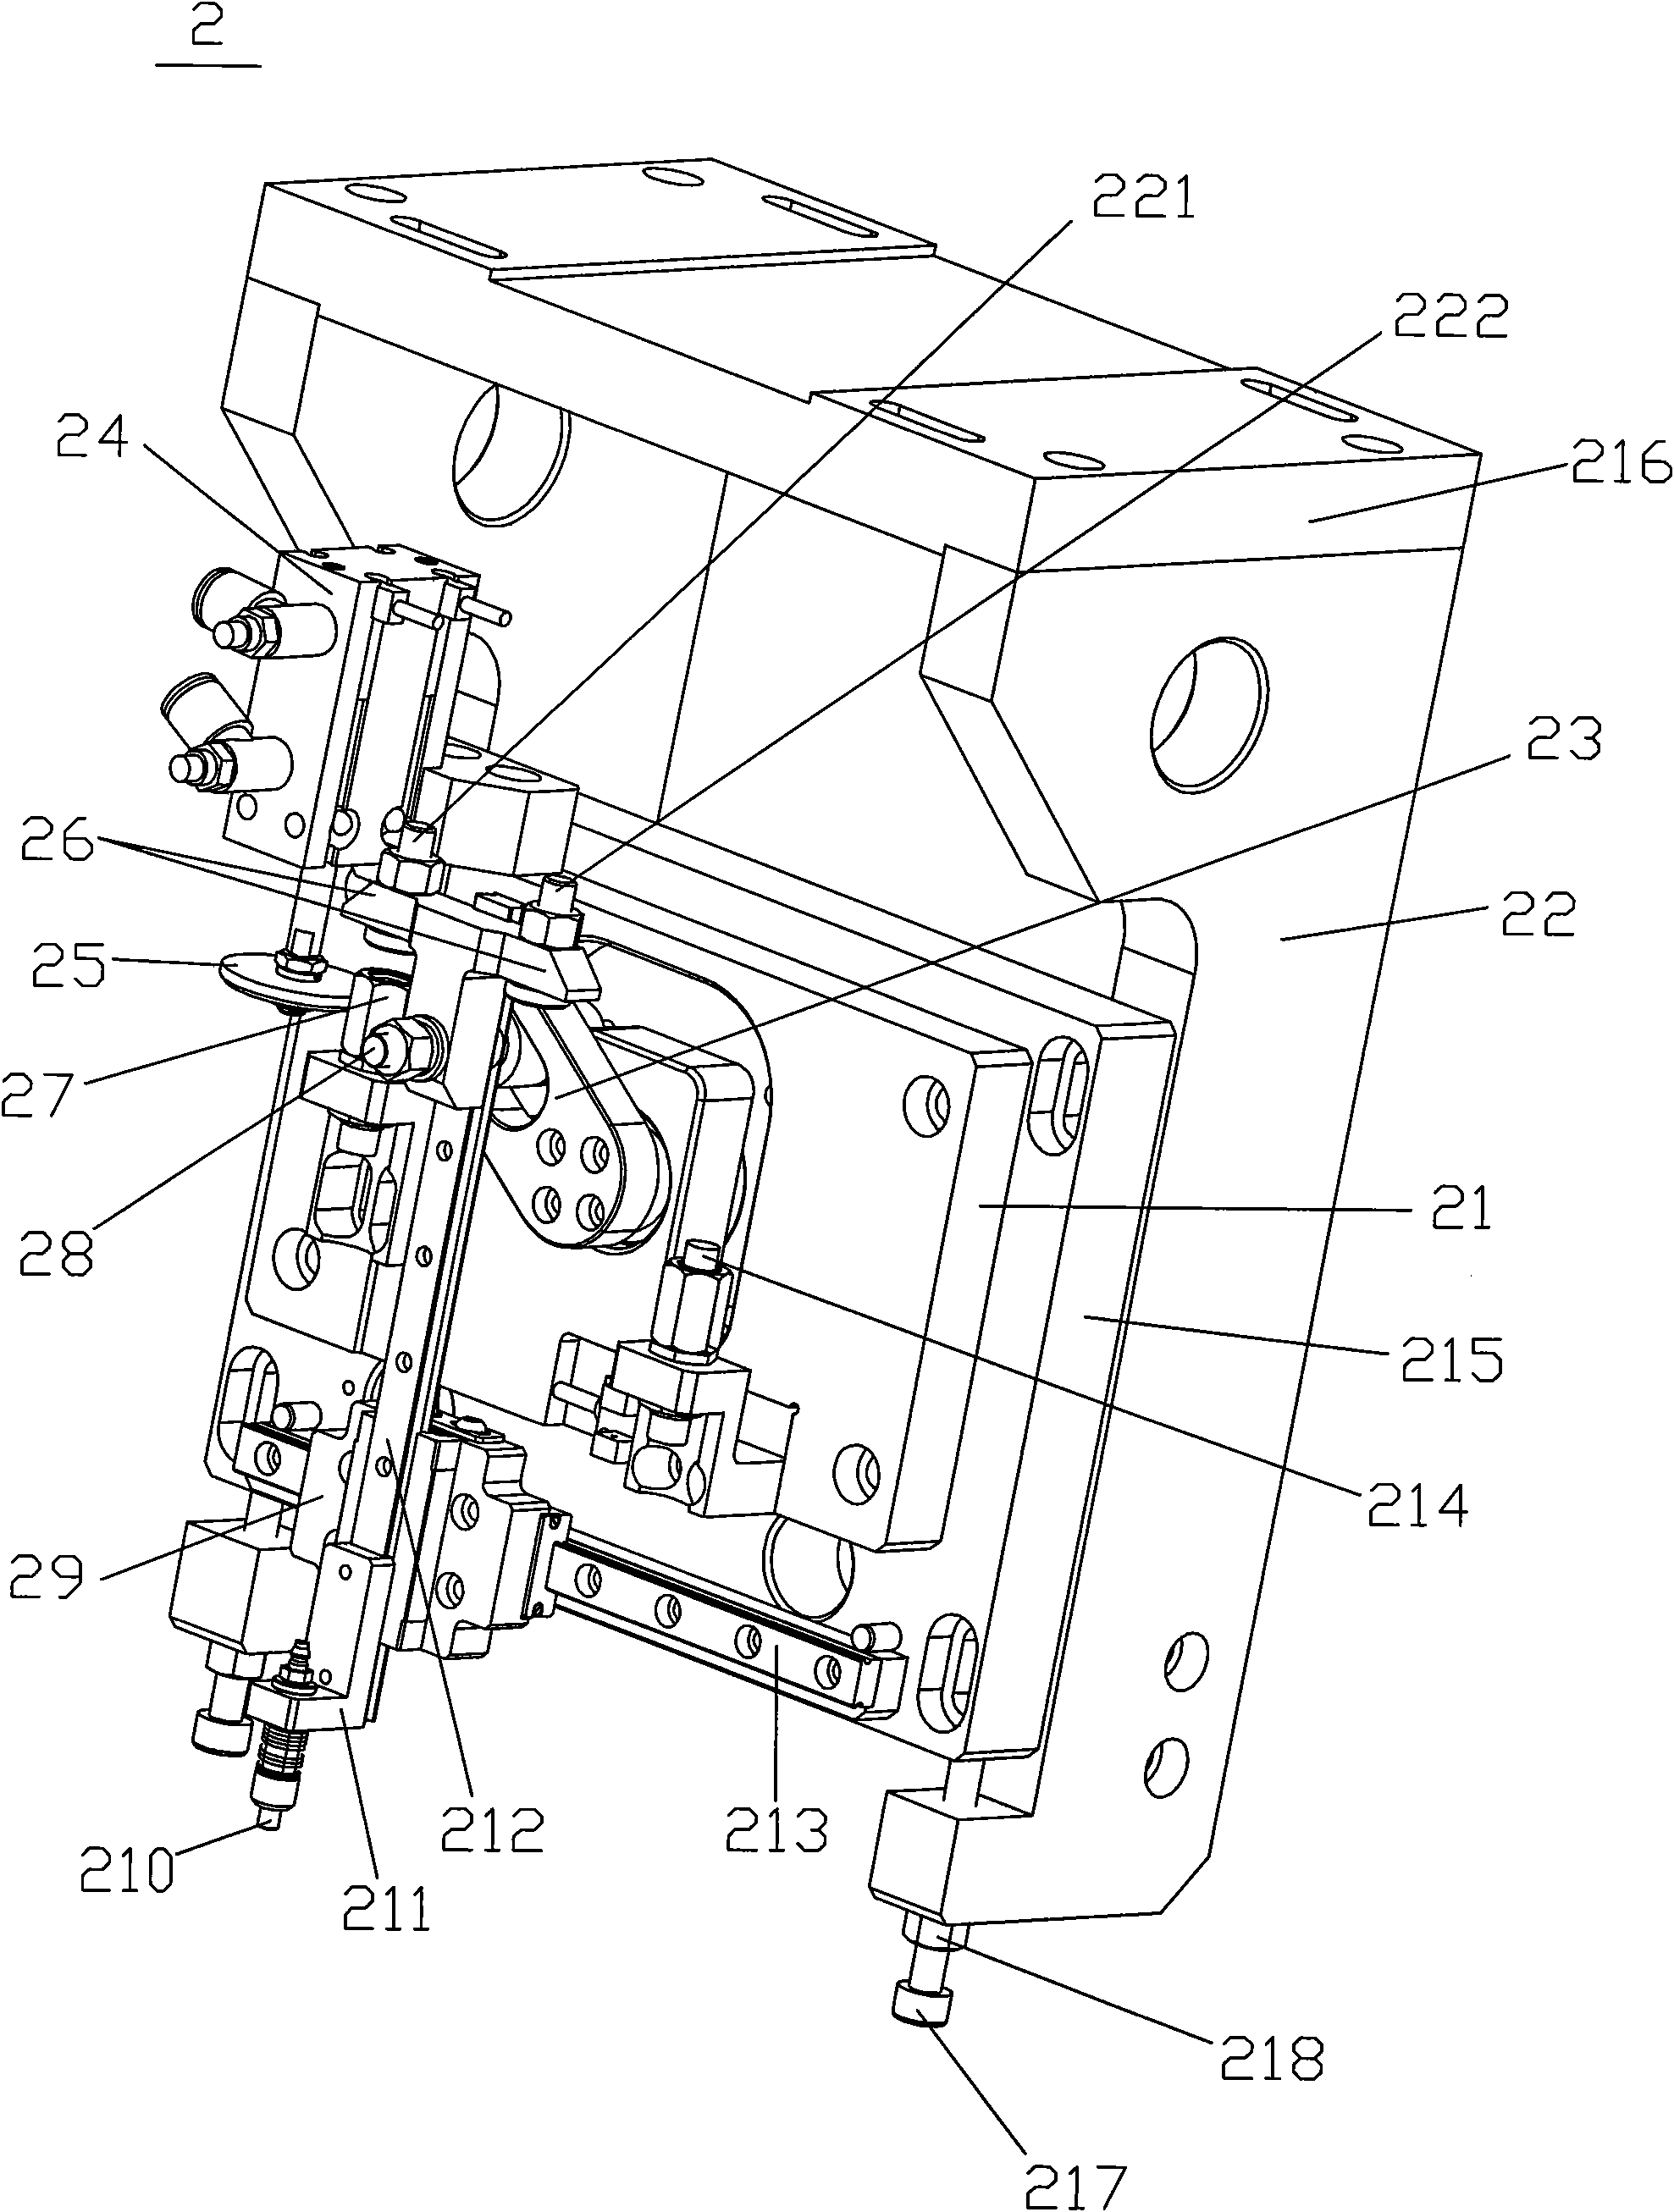 Tray charging method and vibratory tray charger